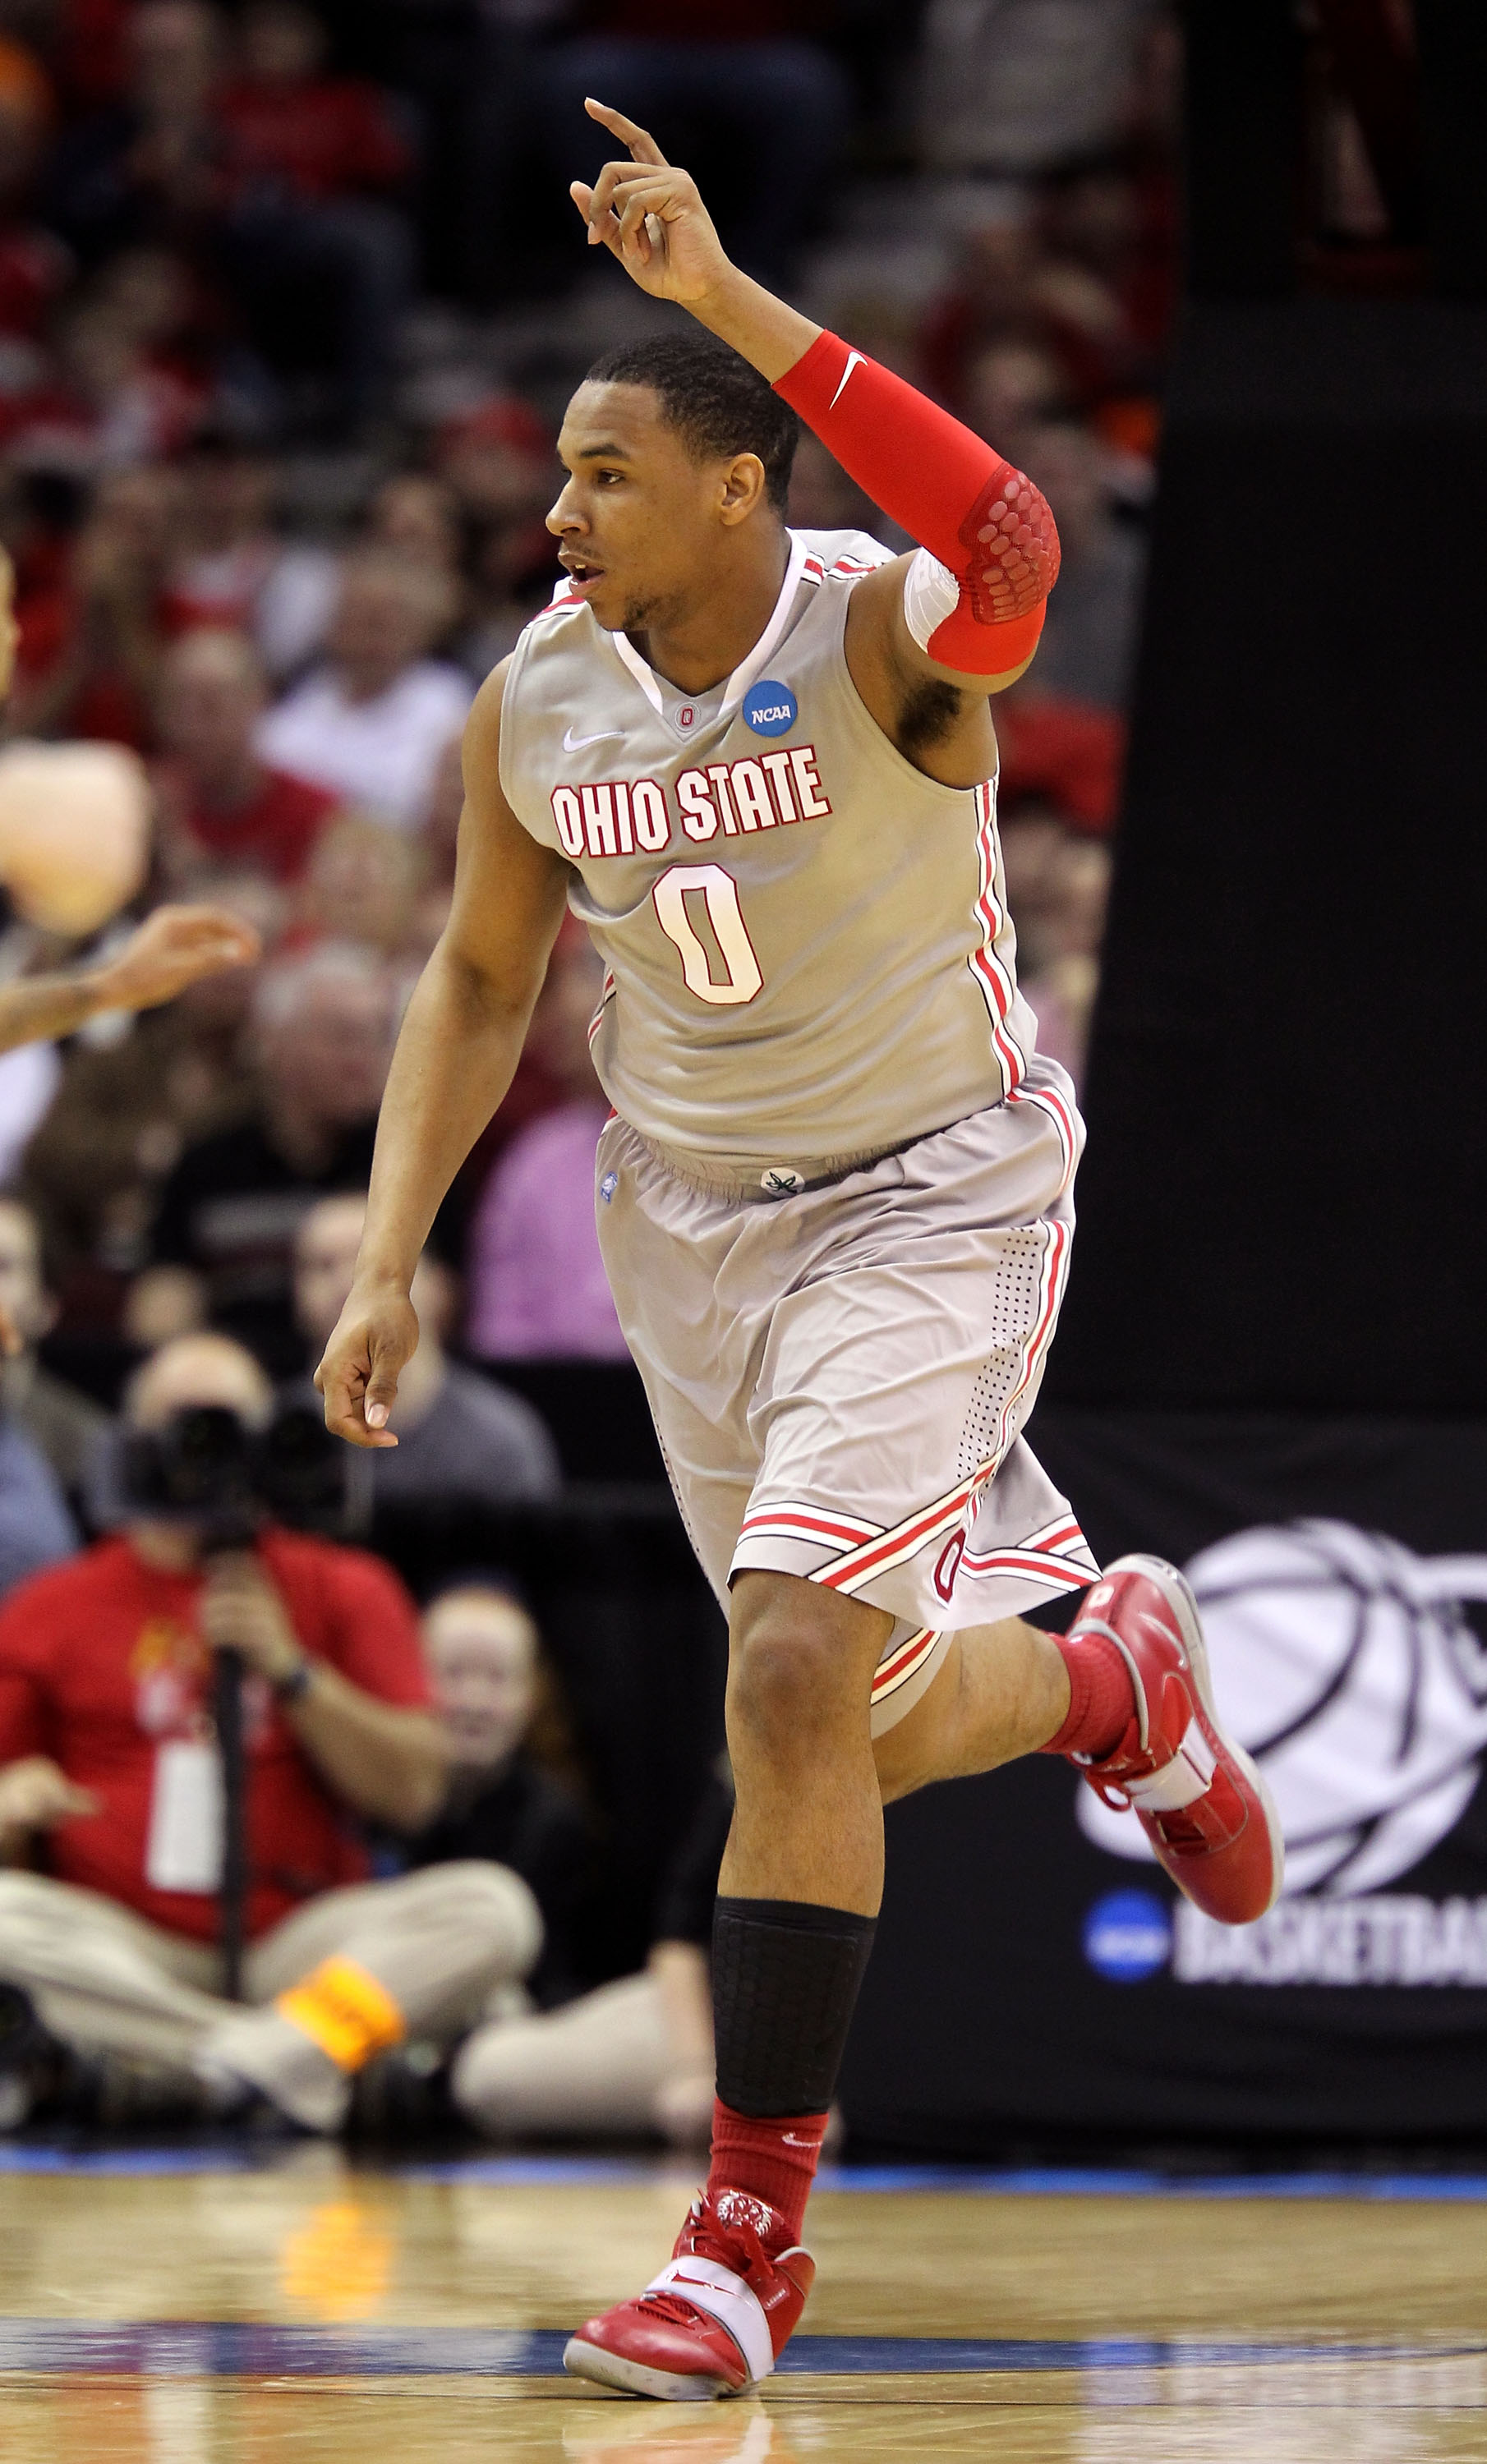 CLEVELAND, OH - MARCH 20: Jared Sullinger #0 of the Ohio State Buckeyes reacts after a play in the first half against the George Mason Patriots during the third of the 2011 NCAA men's basketball tournament at Quicken Loans Arena on March 20, 2011 in Cleve